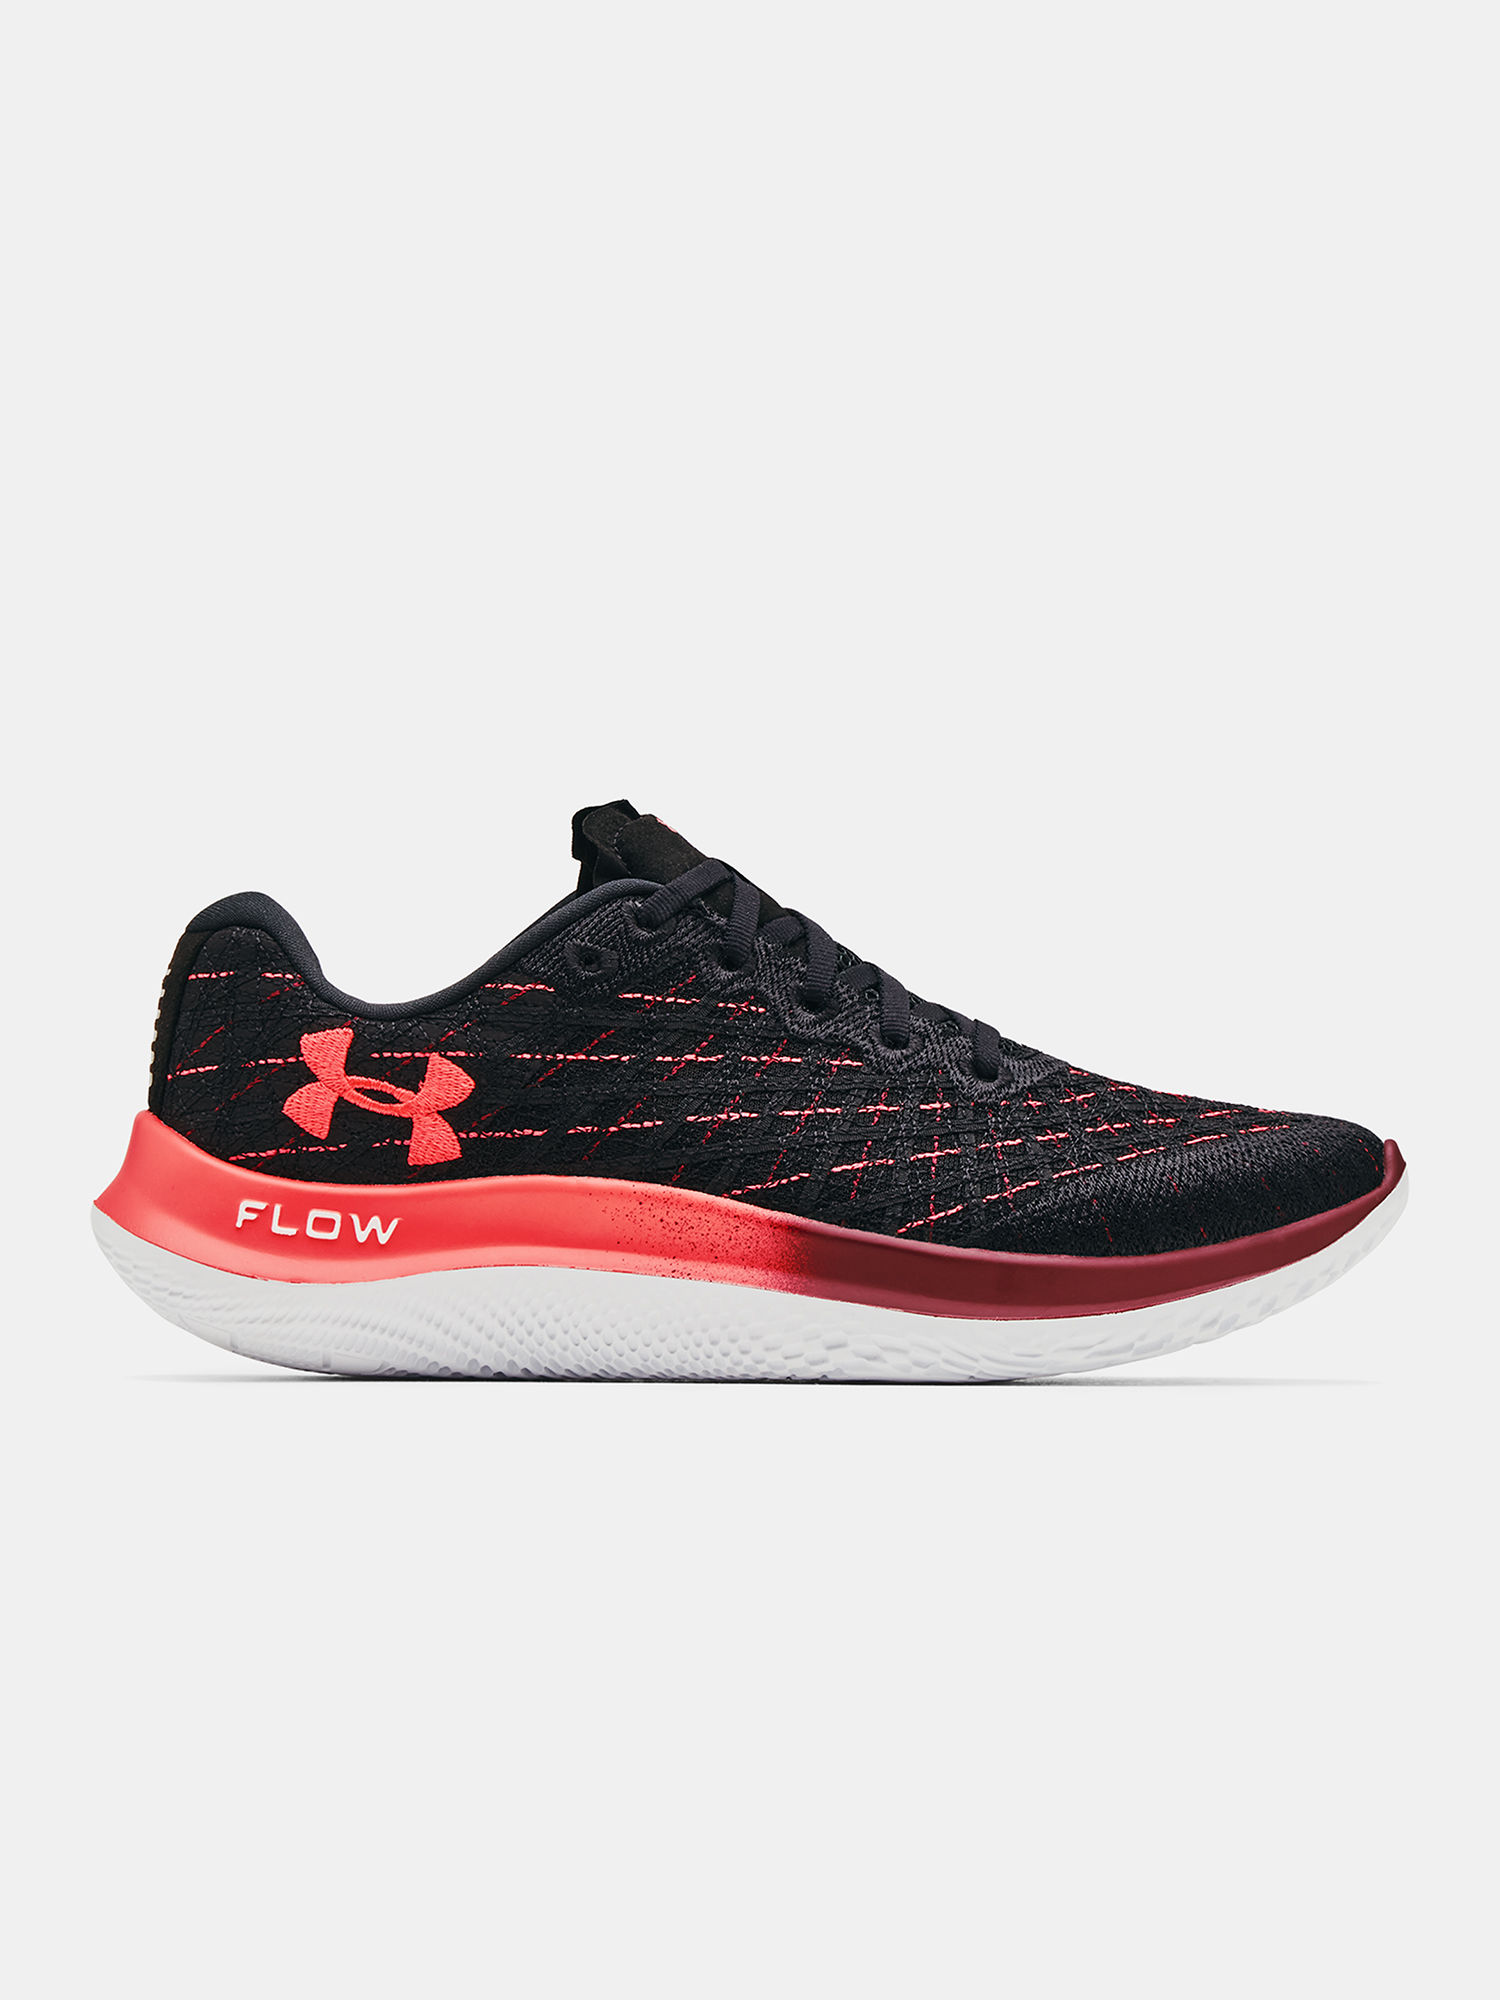 Boty Under Armour FLOW Velociti Wind CLRSFT-BLK (1)